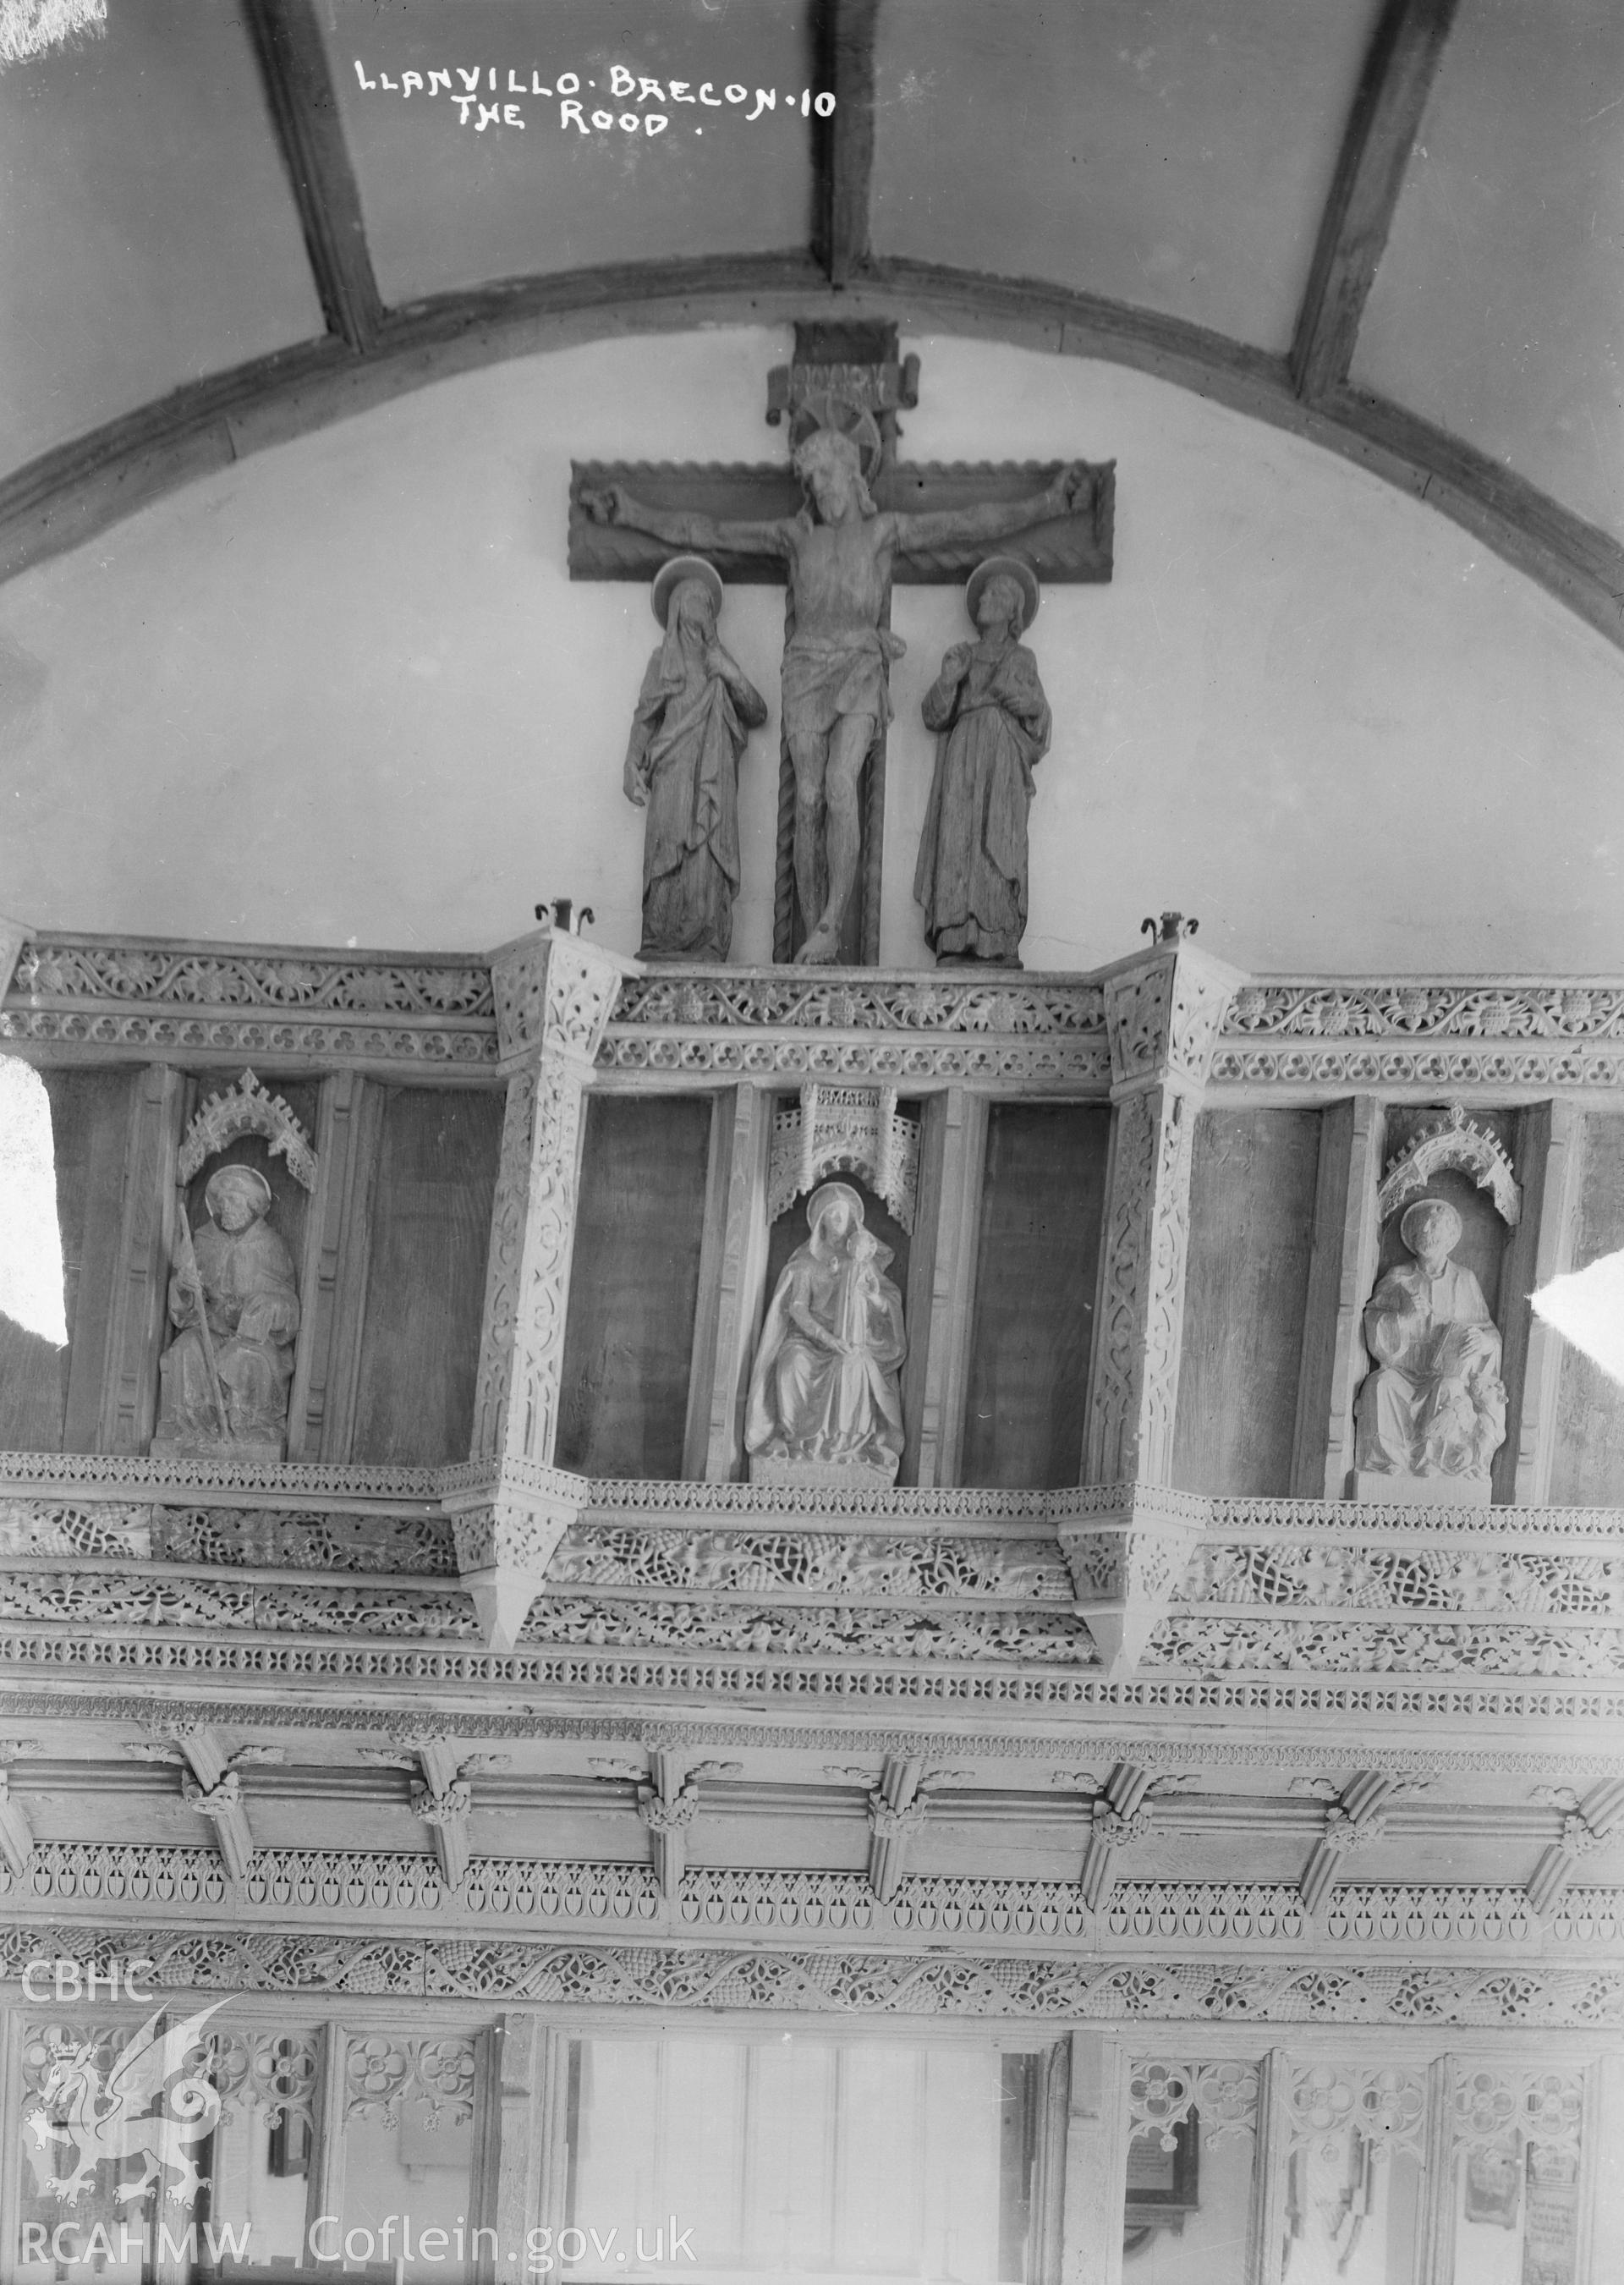 View of the rood screen in Llanfilo Church, taken by W A Call circa 1920.